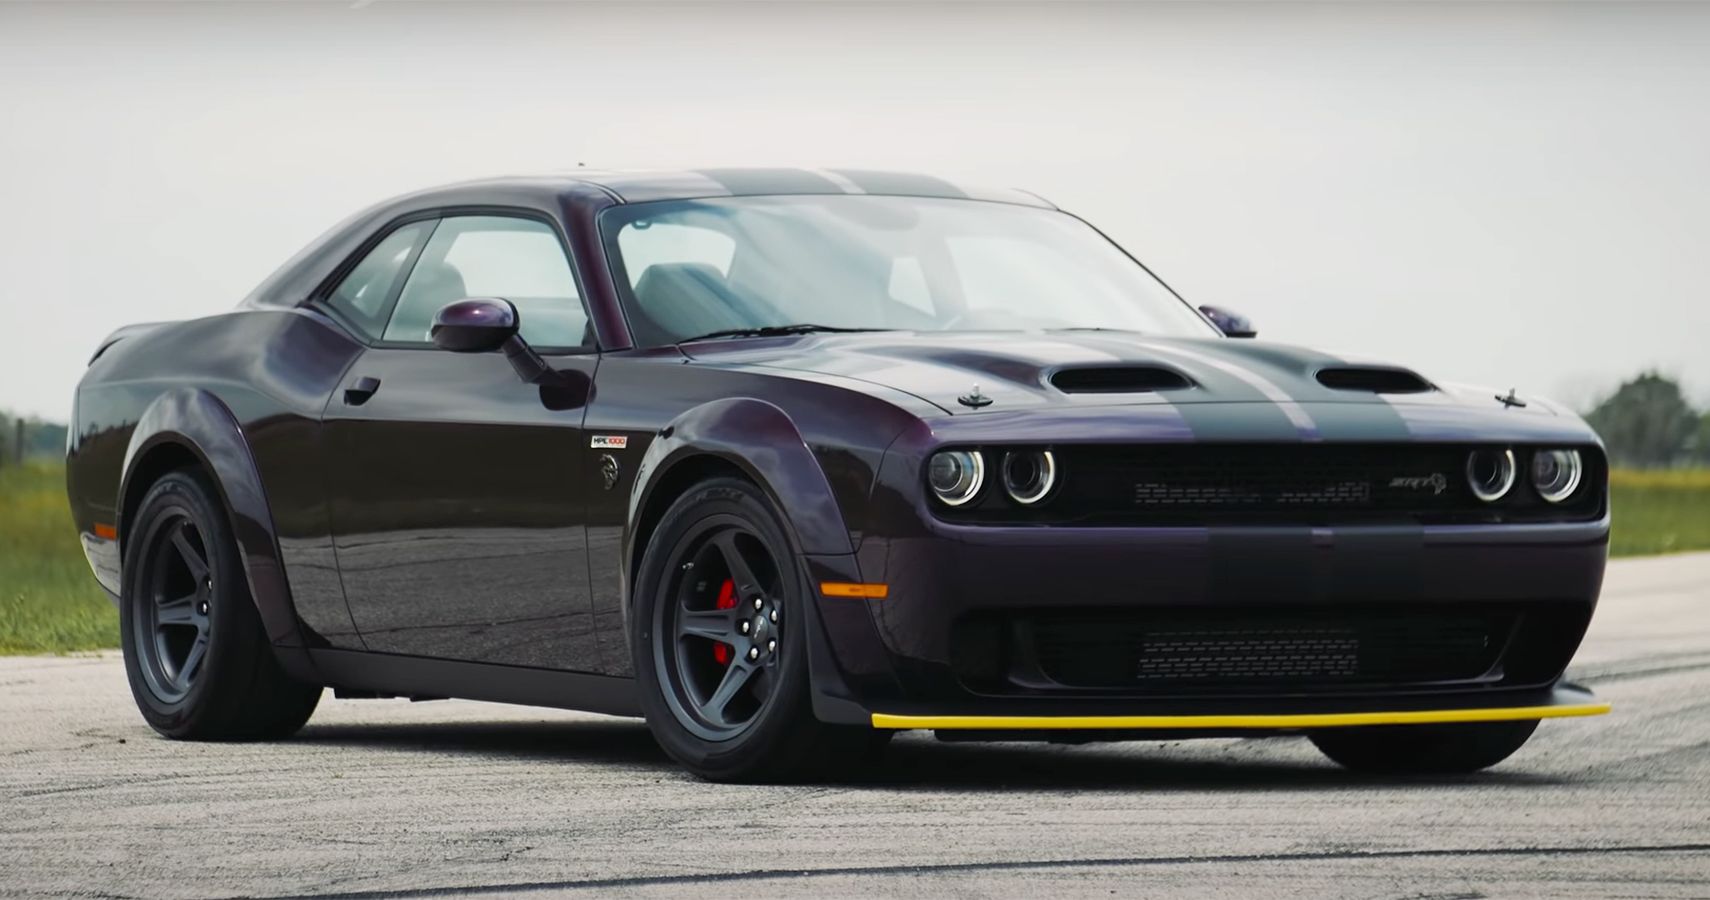 Hennessey Performance Introduces 1,000HP Upgrade For Dodge SRT